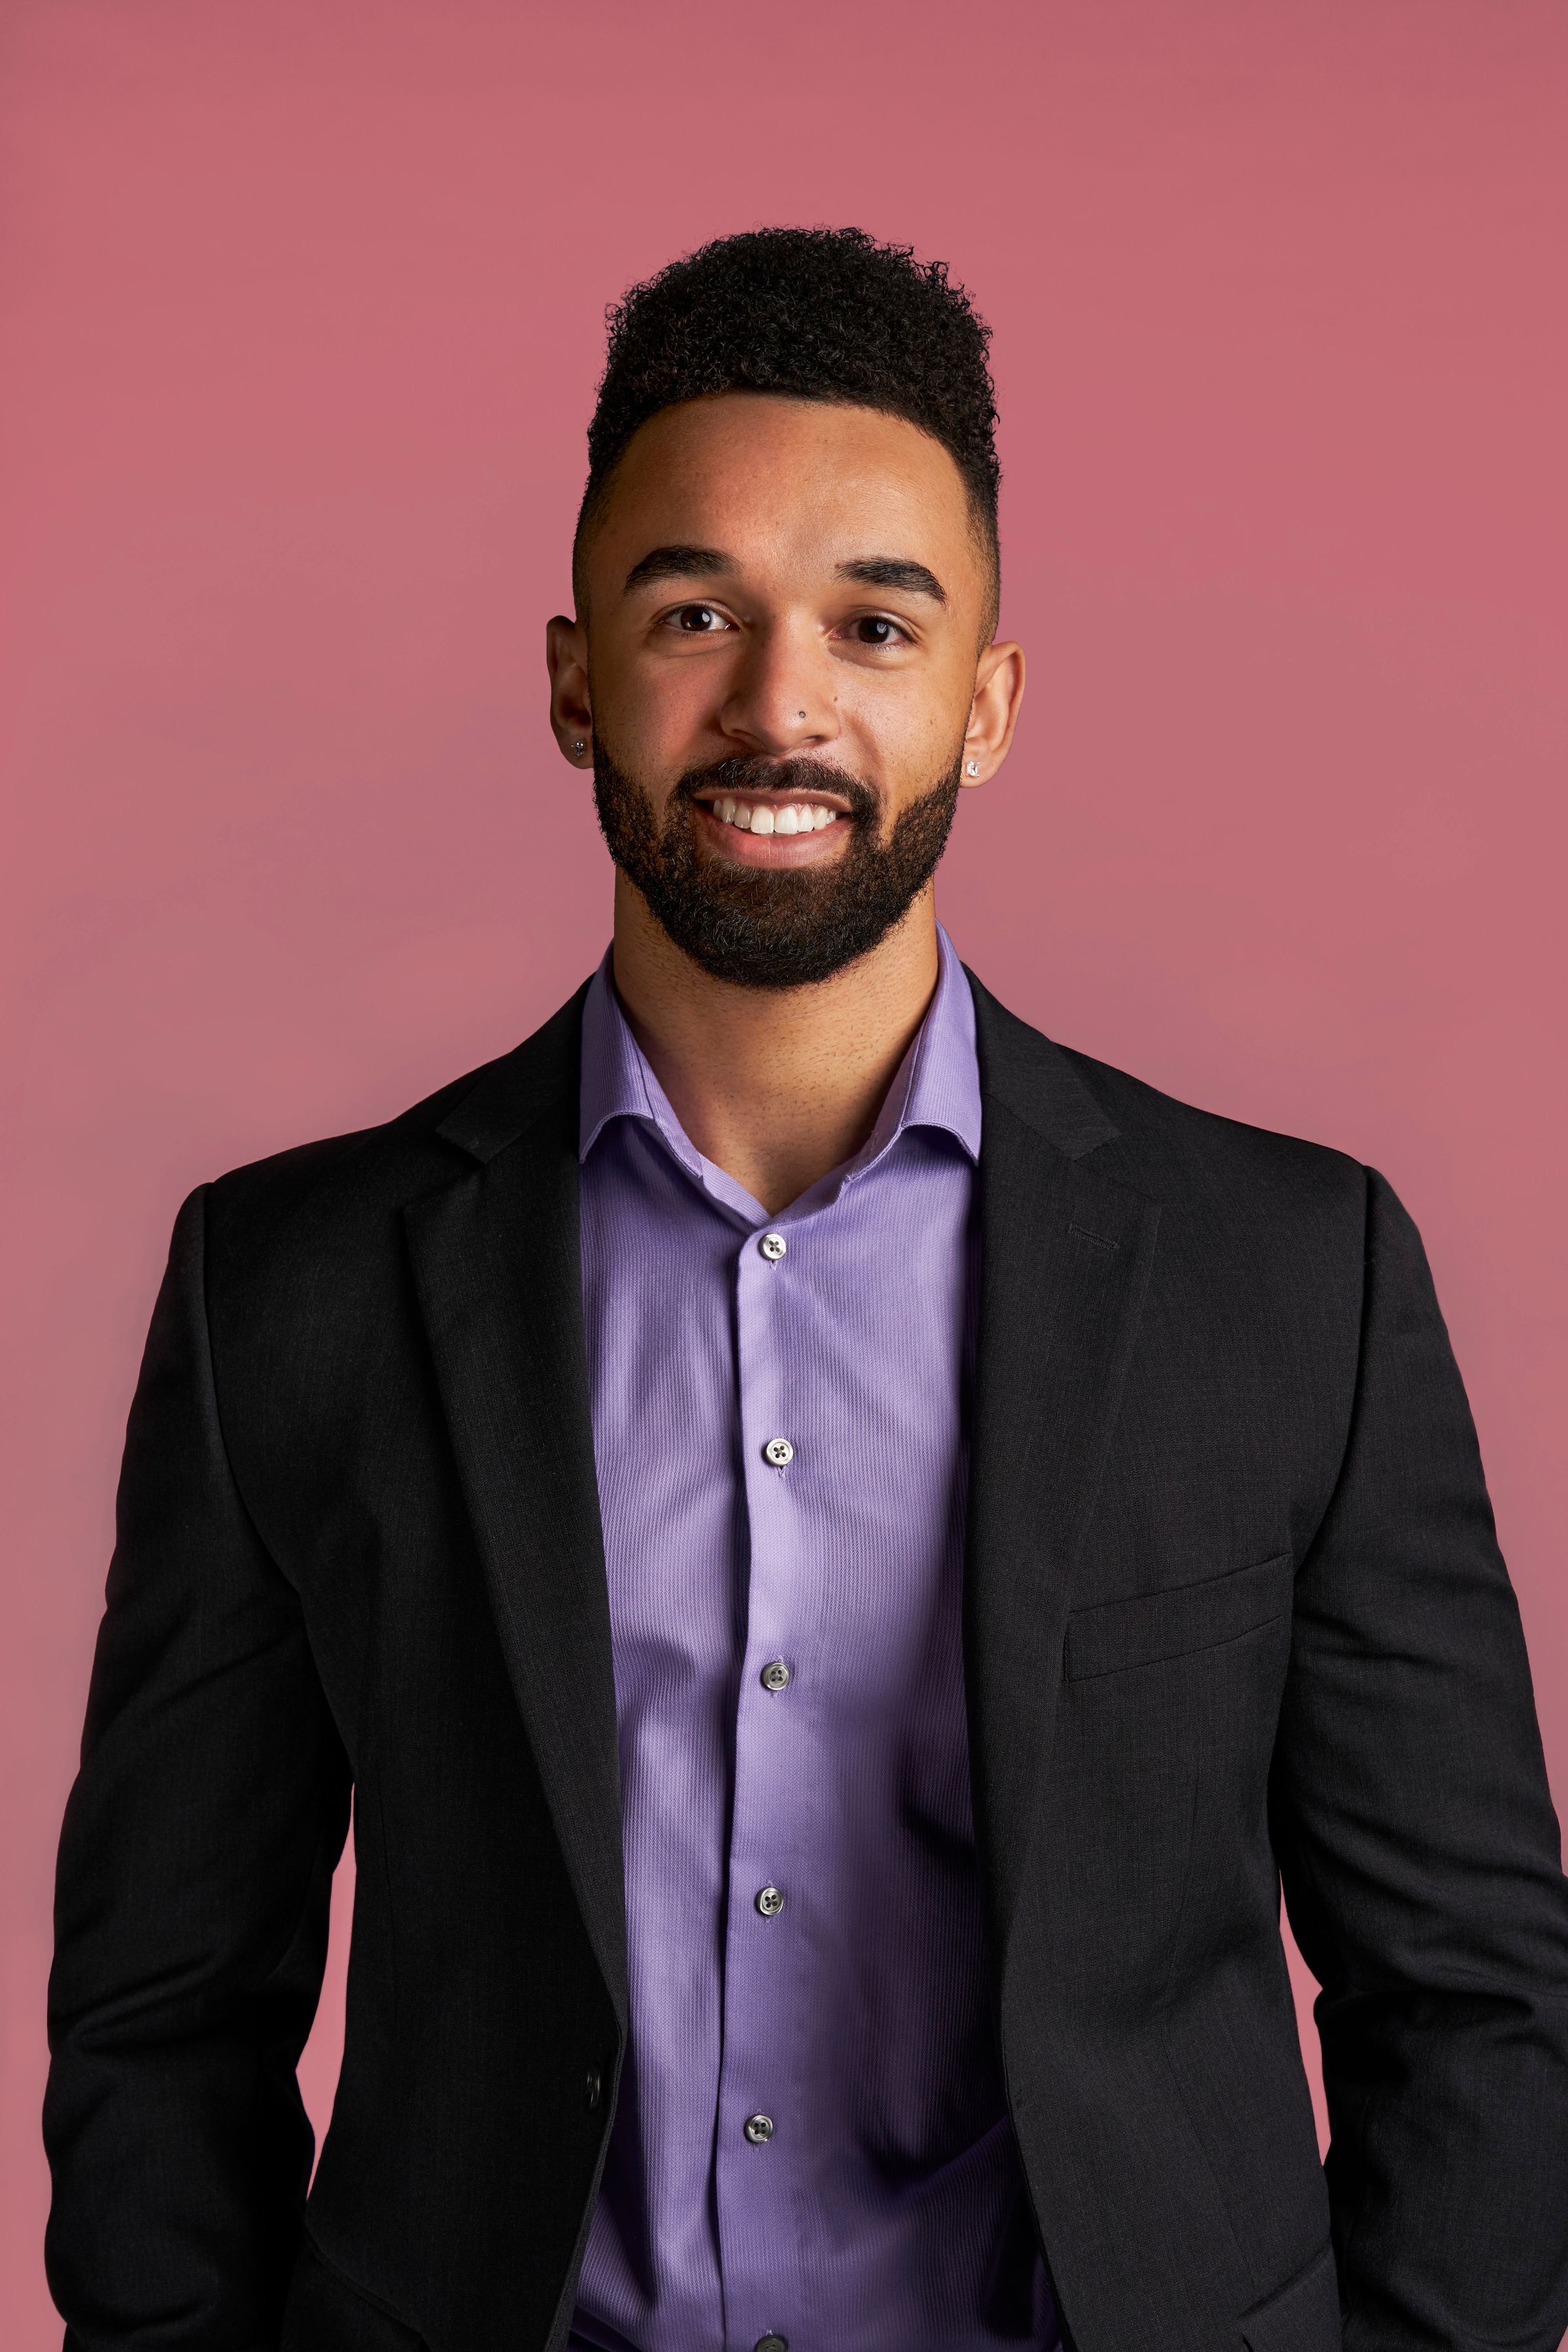 Love Is Blind' Star Bartise Bowden Debuts New Relationship